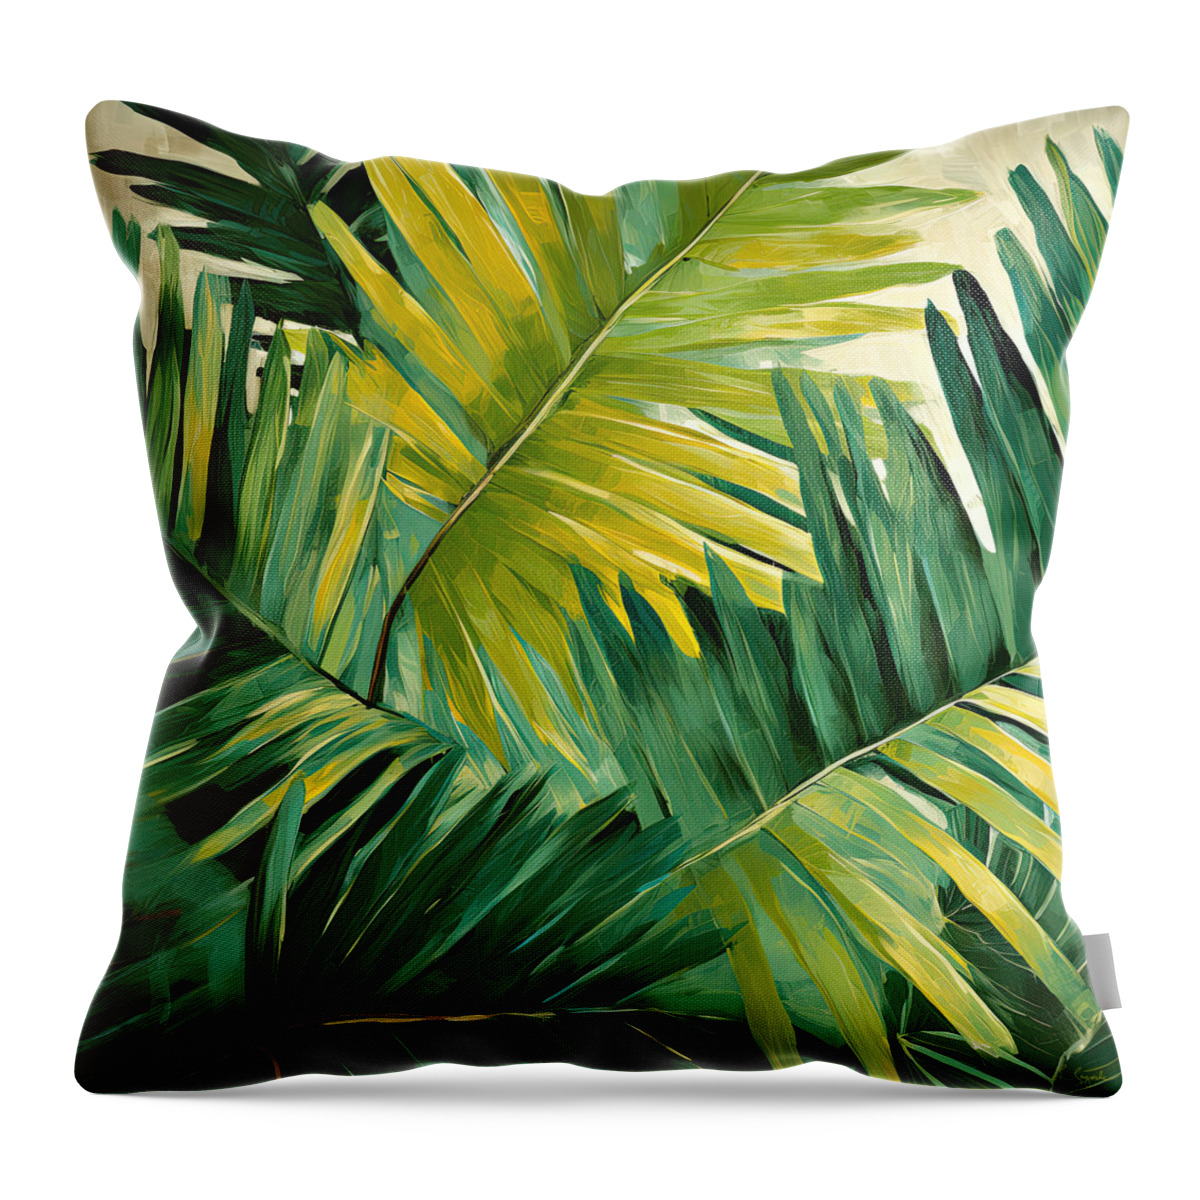 Tropical Leaves Throw Pillow featuring the digital art Tropical Home Designs by Lourry Legarde